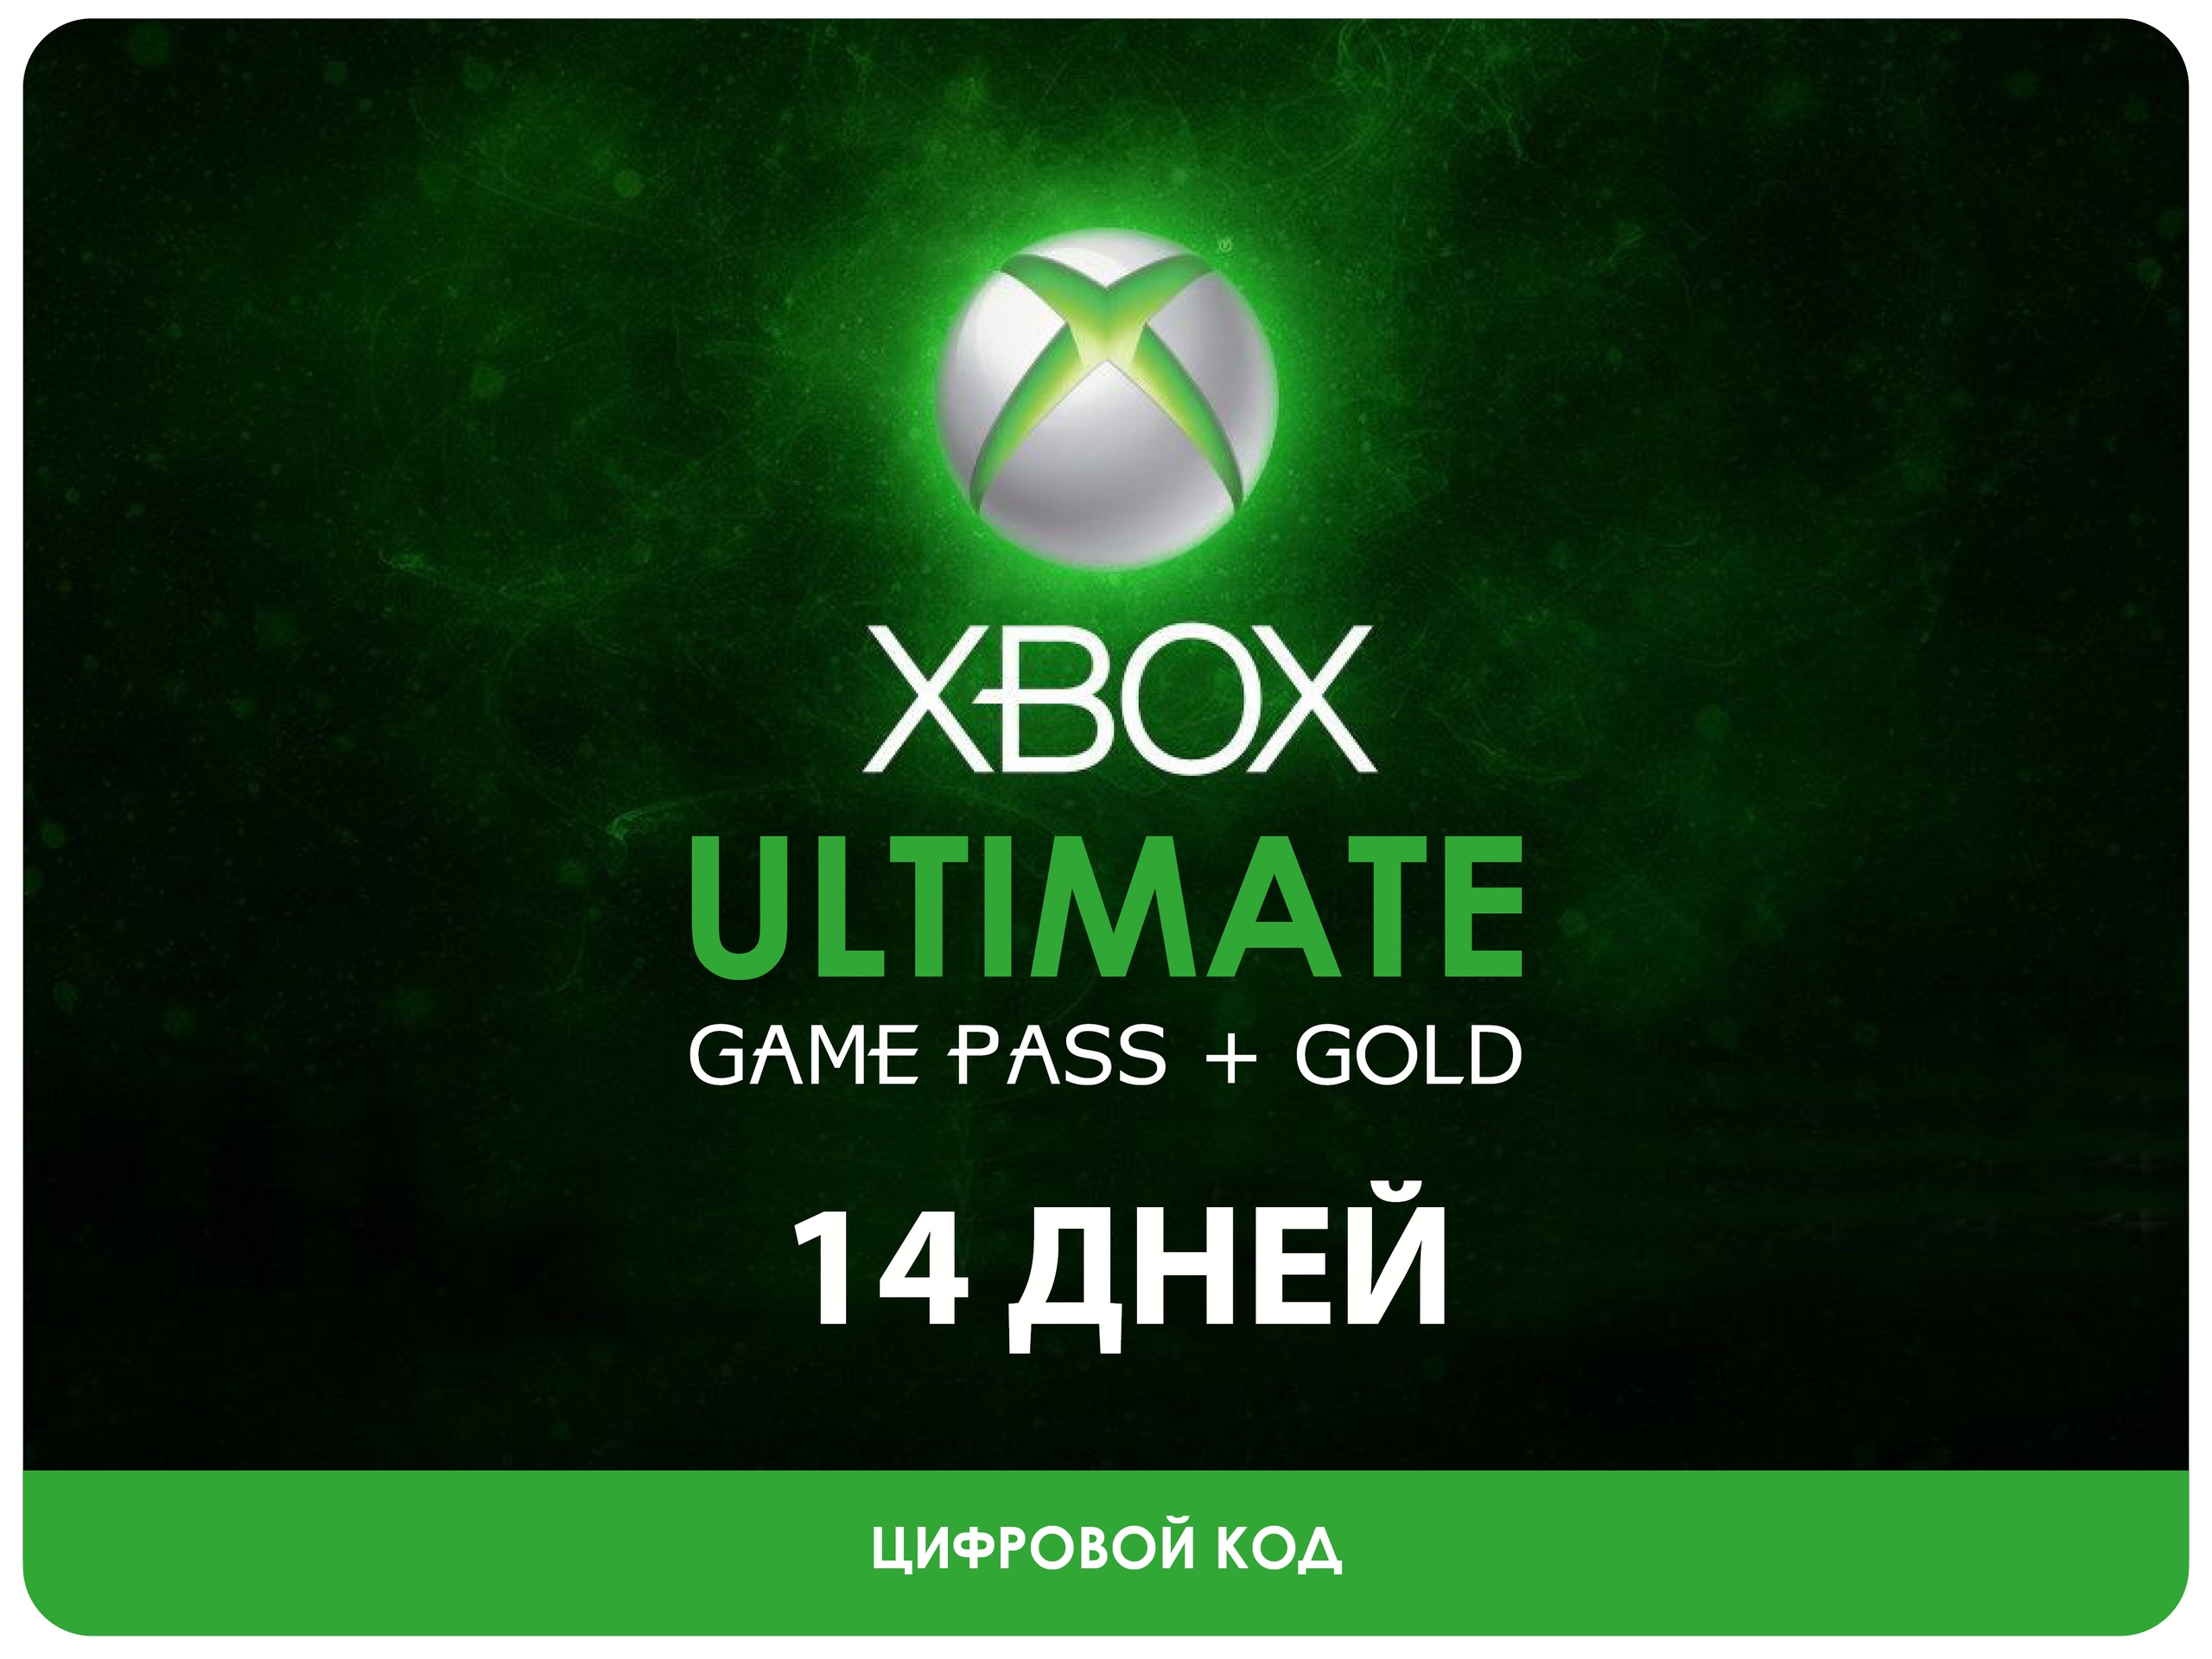 xbox game pass ultimate: 24-month price